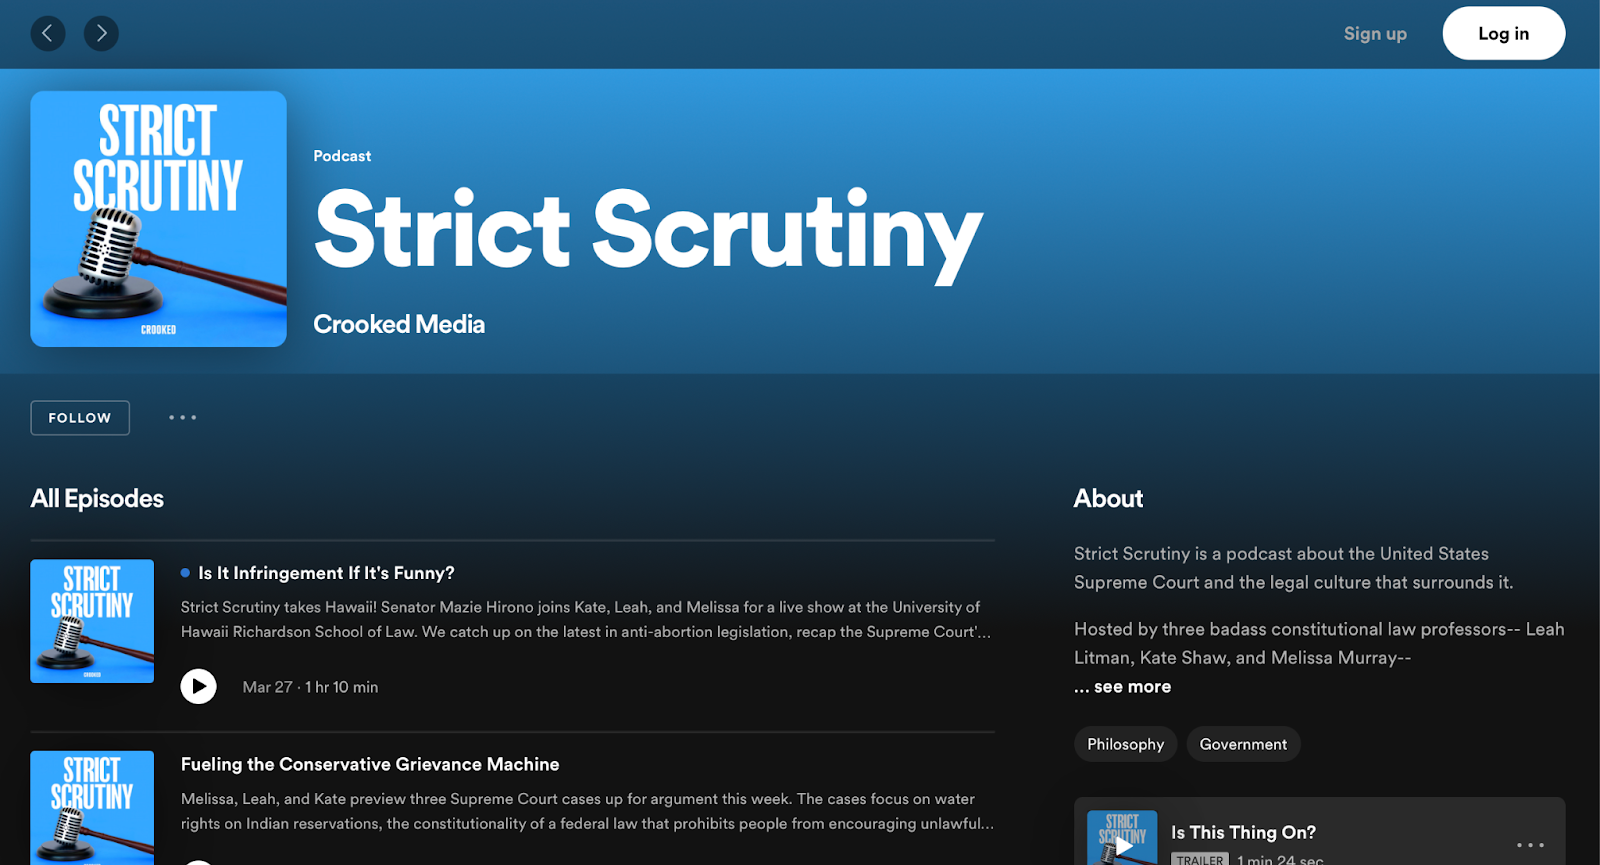 All About Strict Scrutiny Podcast: Examining Constitutional Law And The Supreme Court's Decisions